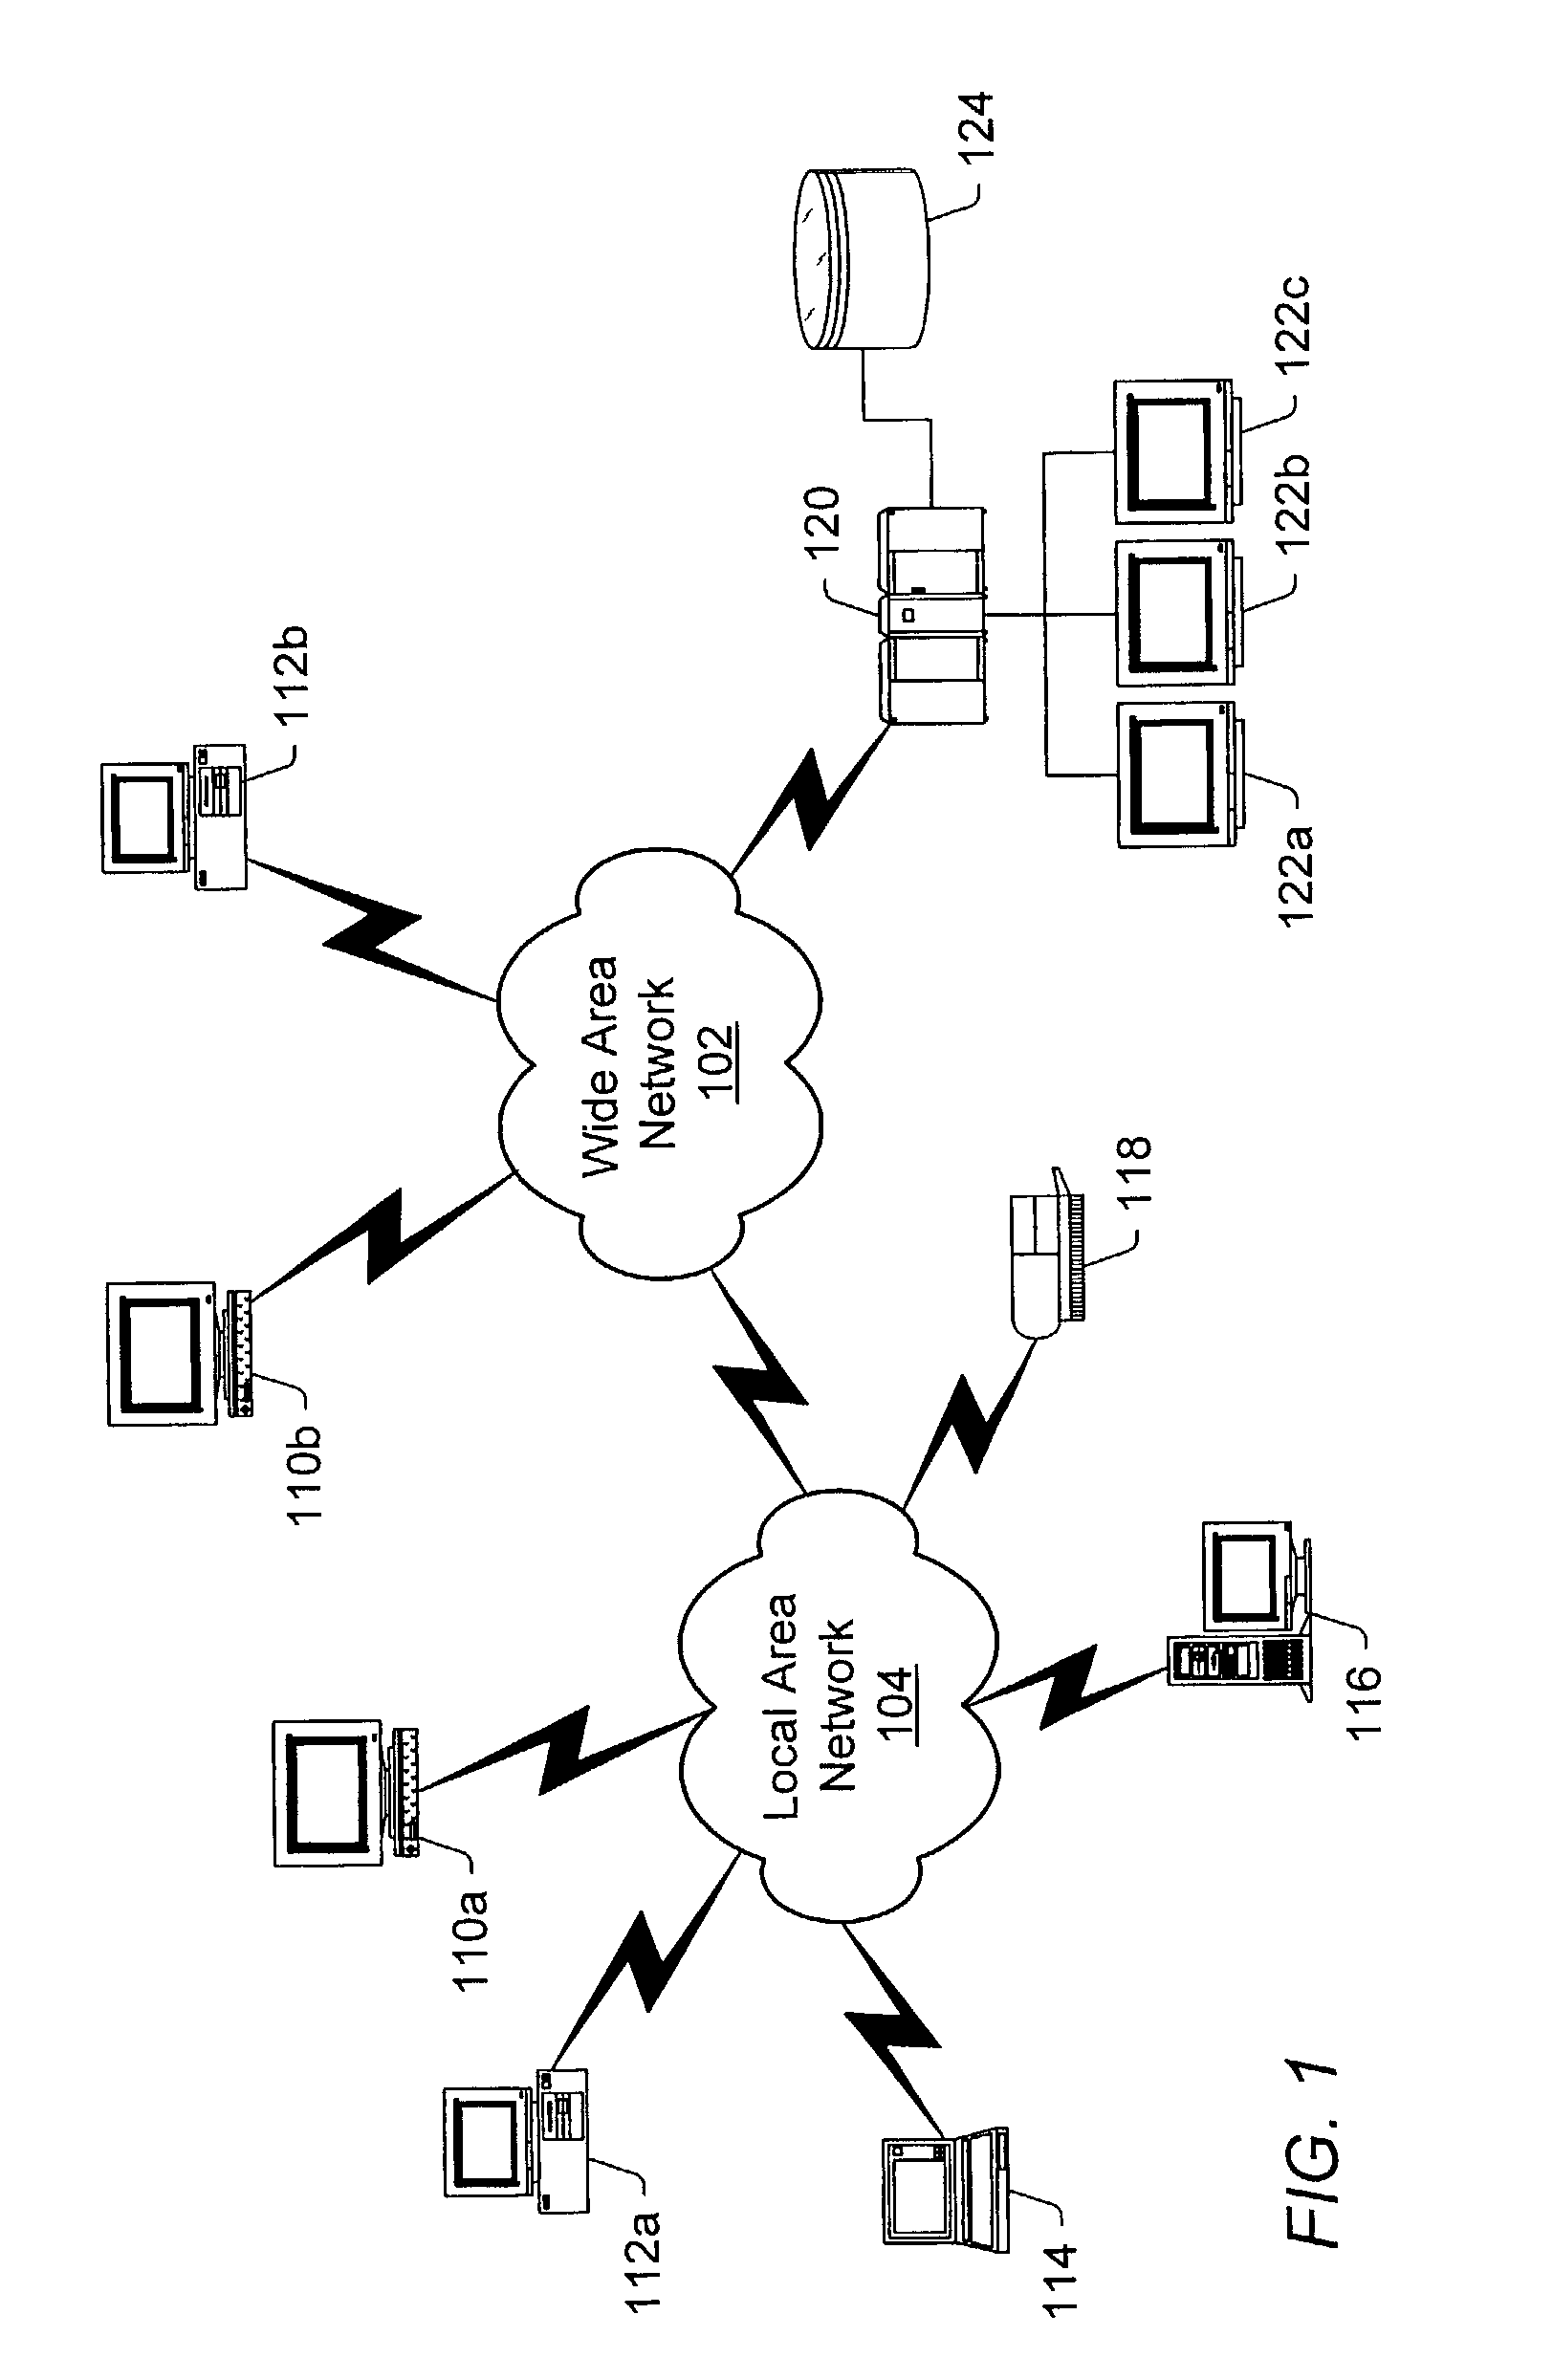 Computerized method and system for estimating an effect on liability of the speed of vehicles in an accident and time and distance traveled by the vehicles